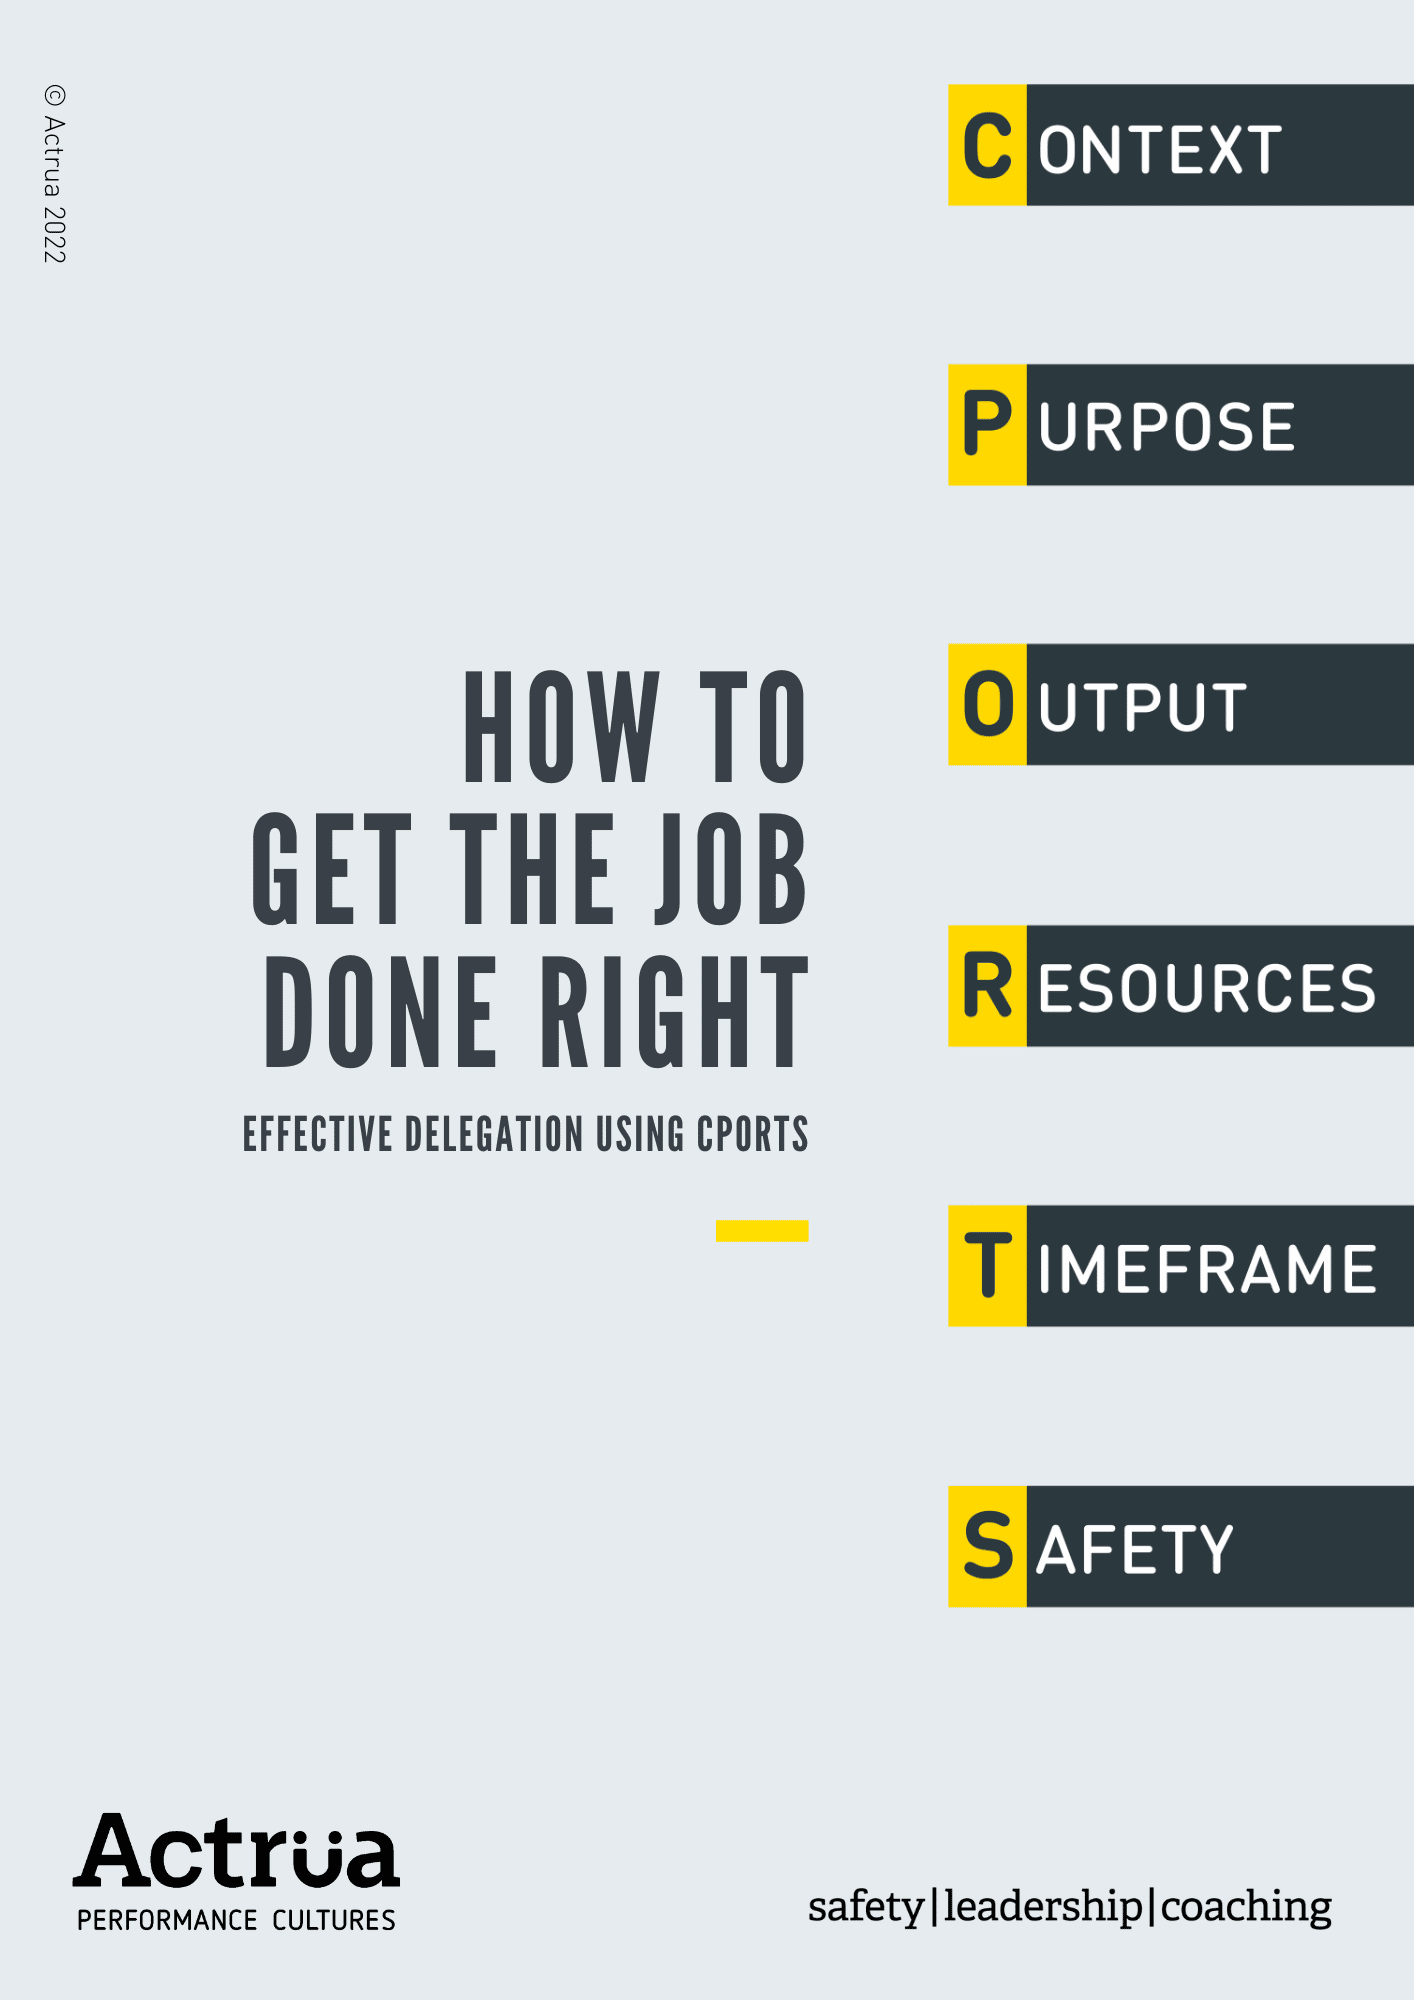 How to get the job done right: Effective delegation using CPORTS